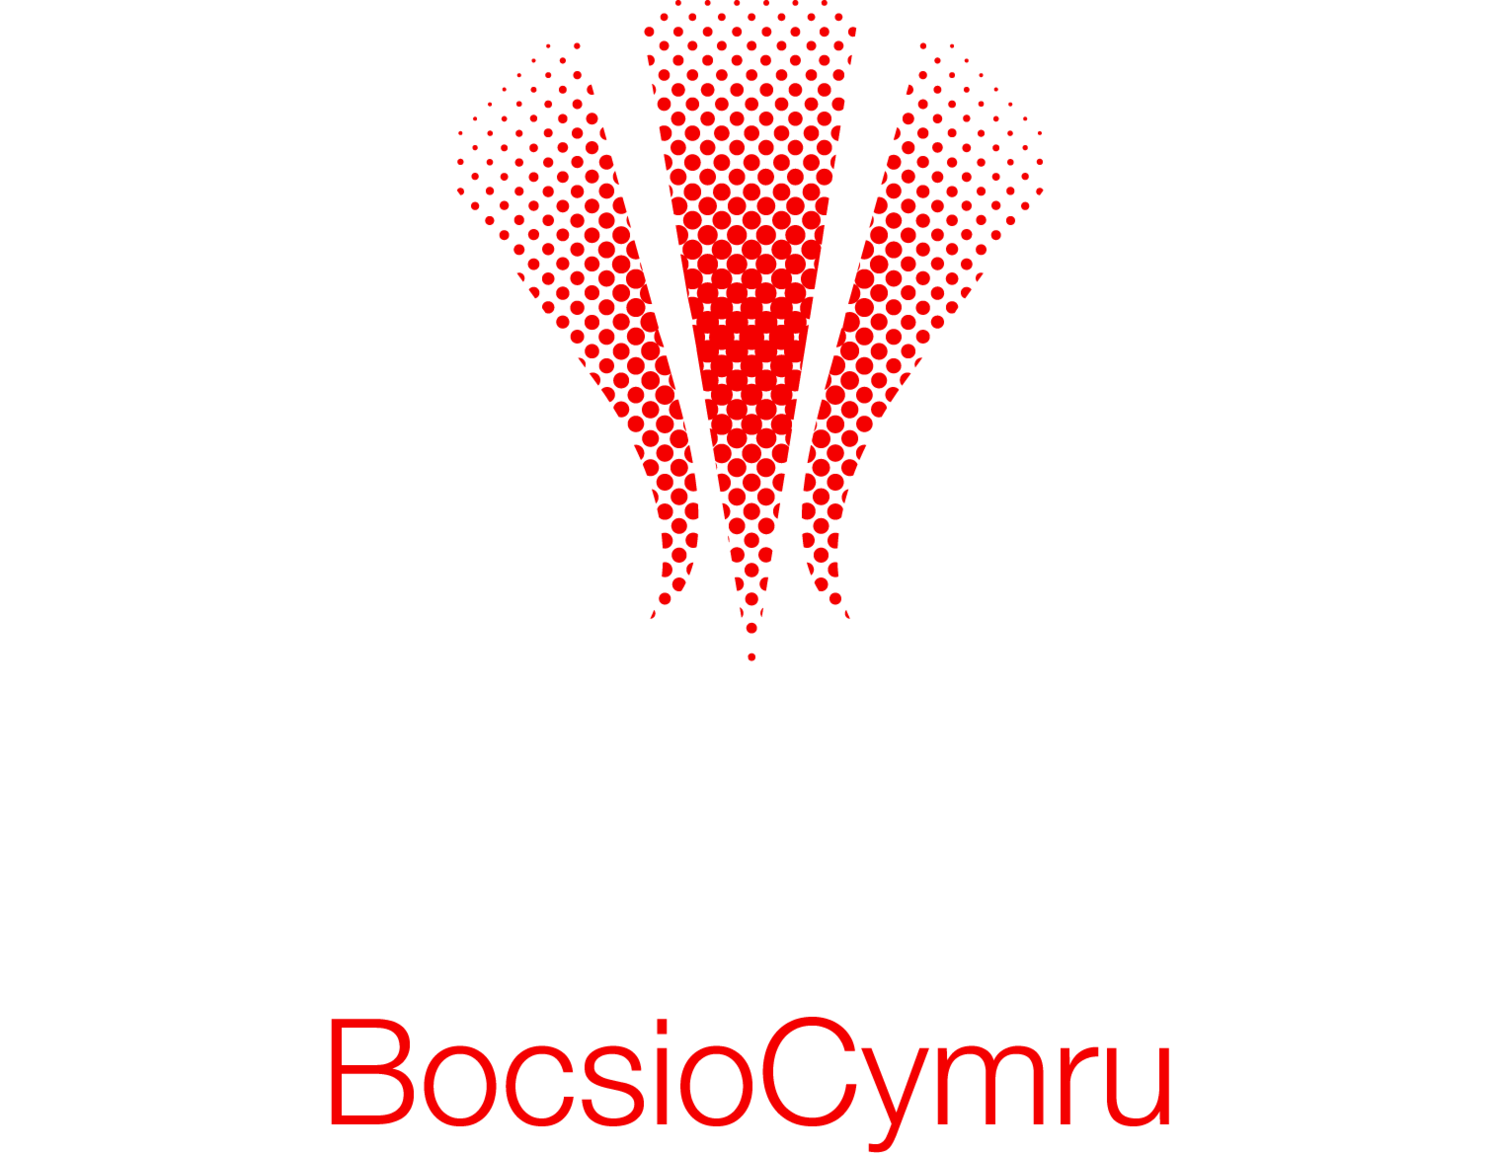 Welsh Boxing